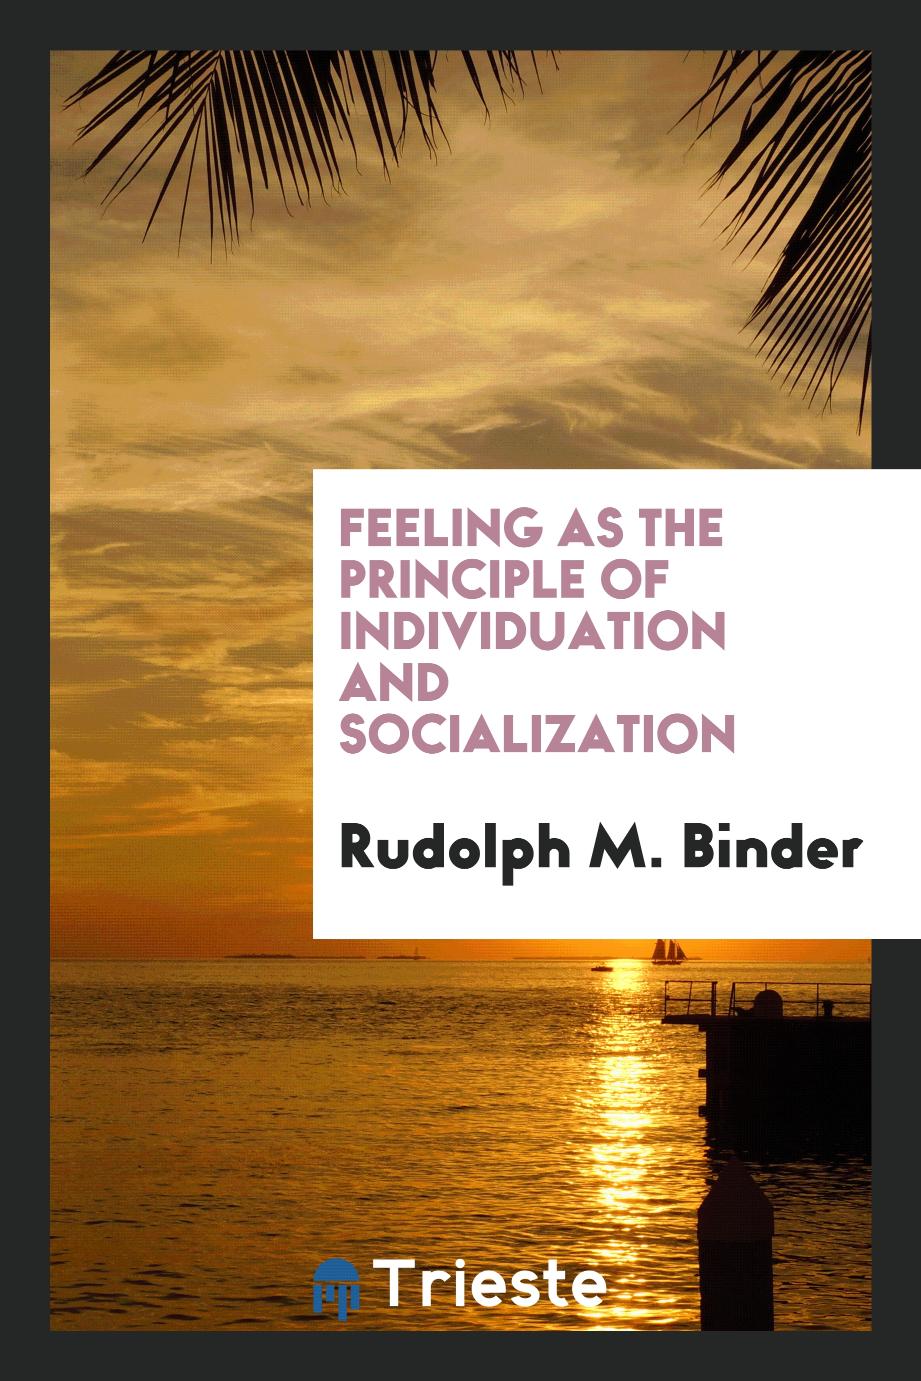 Feeling as the Principle of Individuation and Socialization